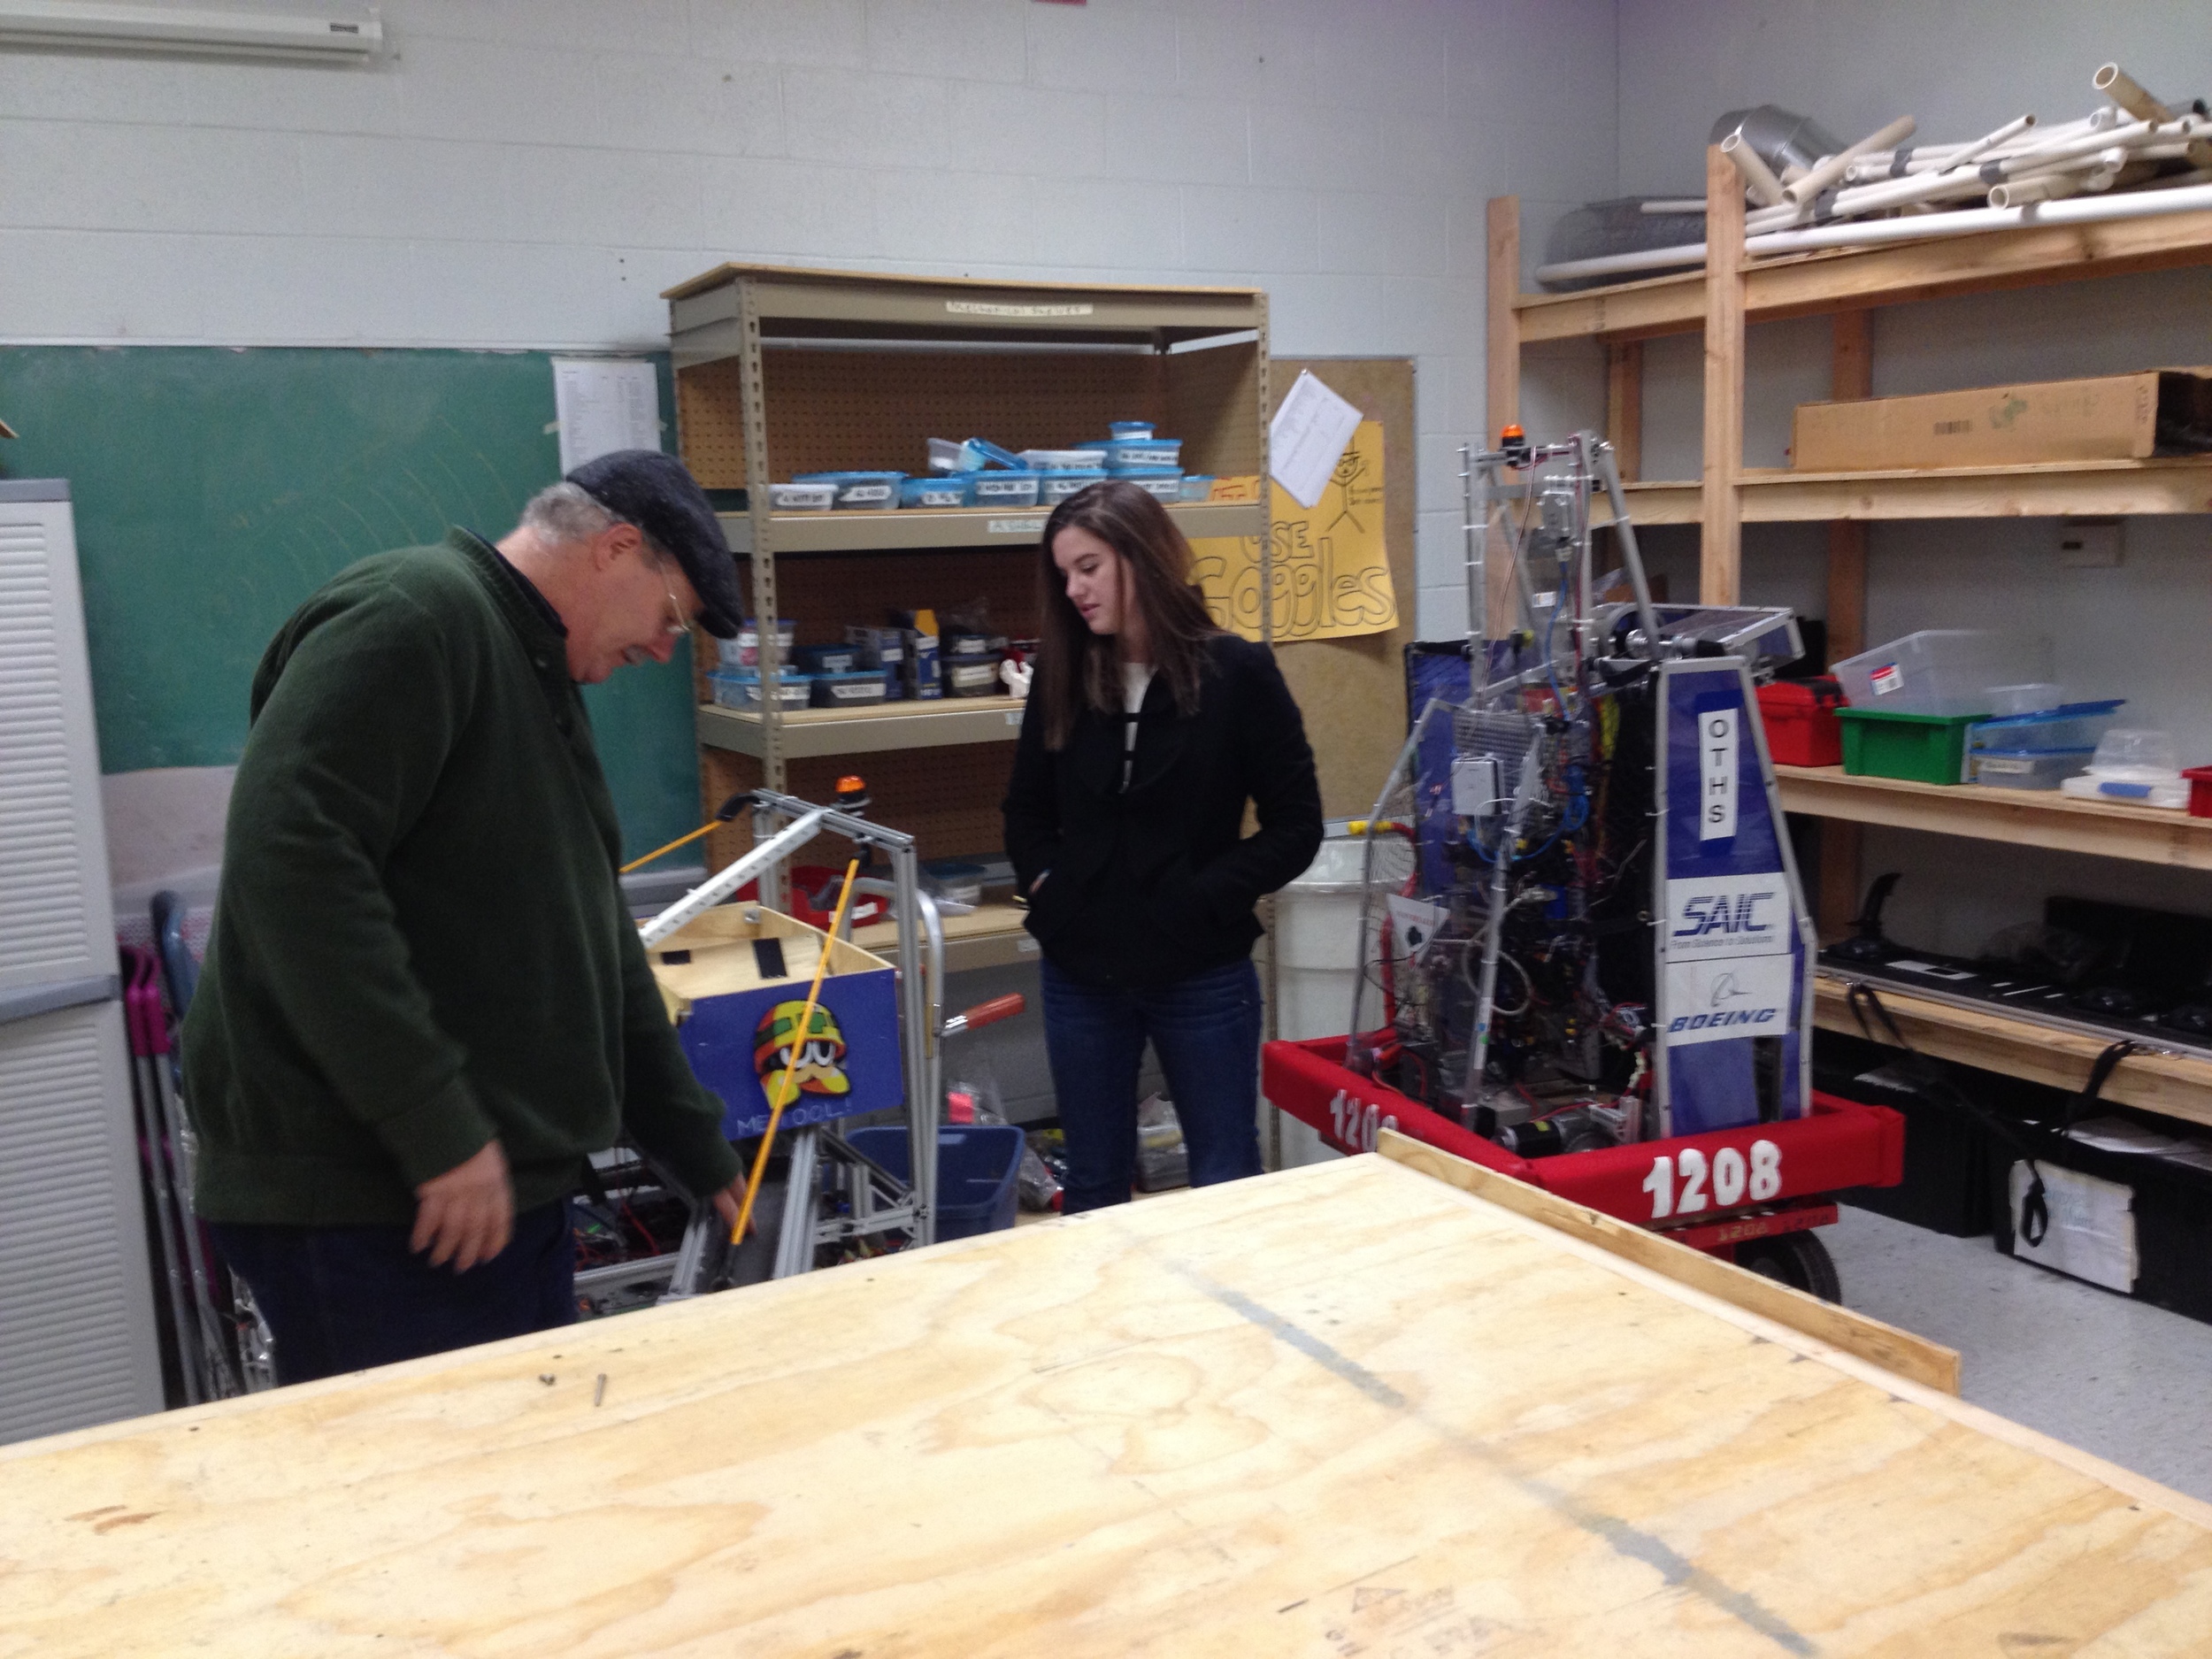  Team 1208 mentor, Mr. Curry, and former team member, Adrienne Bowman, in the new workshop (The Botcave) 